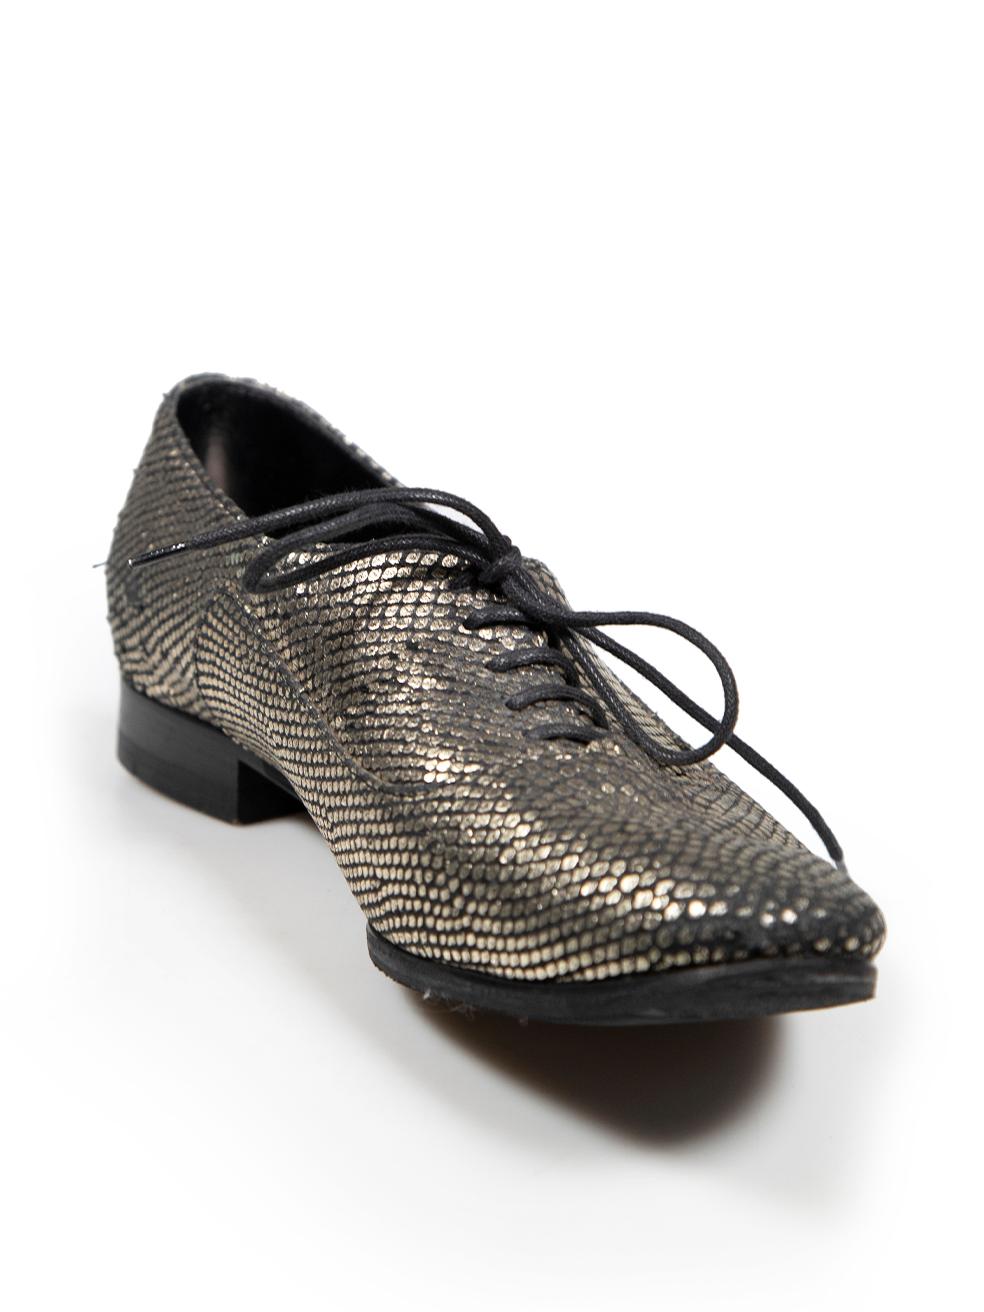 CONDITION is Good. Minor wear to shoes is evident. Light abrasion to heel seam, soles, inside back of shoe and toe edge on this used Saint Laurent designer resale item. These shoes have been resoled.
 
 Details
 Silver
 Suede
 Oxfords
 Snakeskin